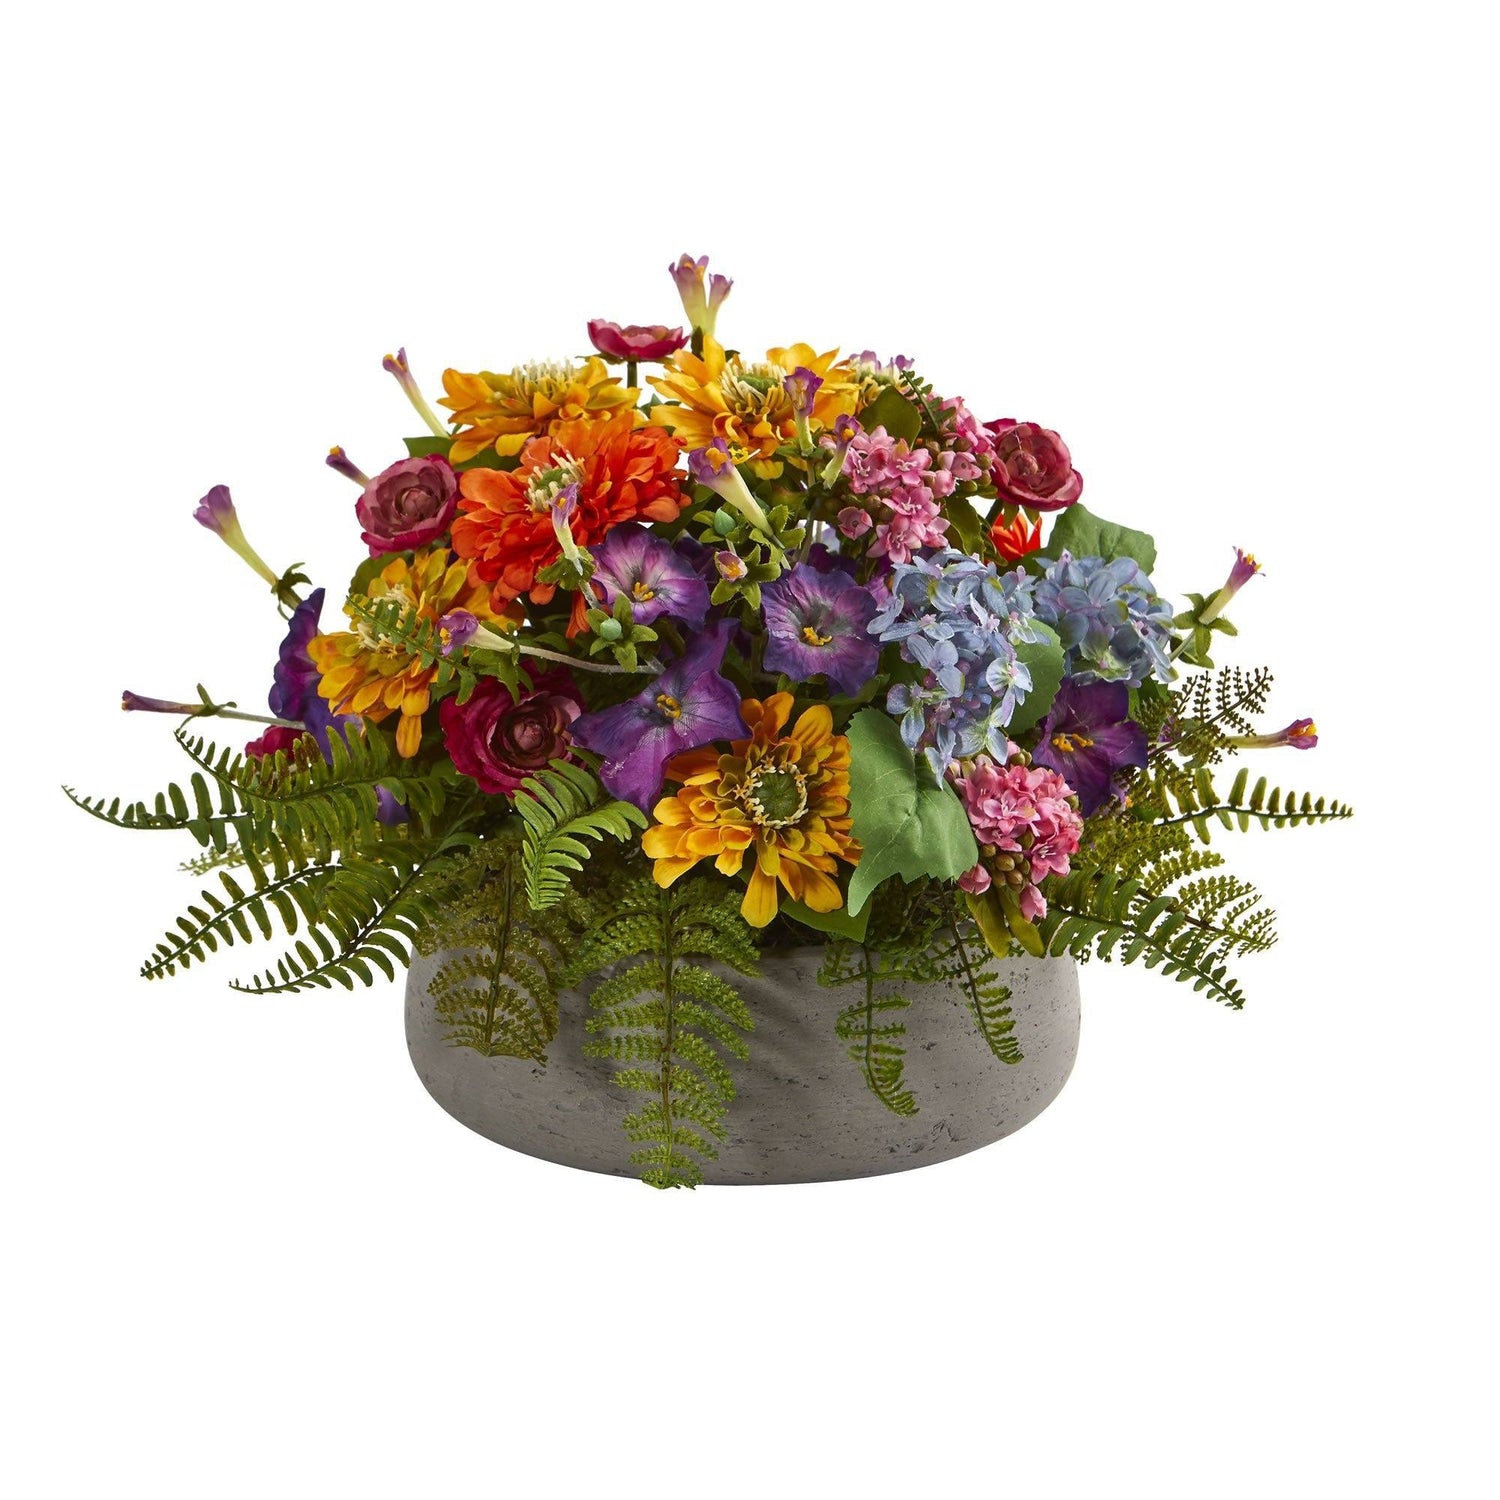 Mixed Floral Artificial Arrangement in Stone Planter